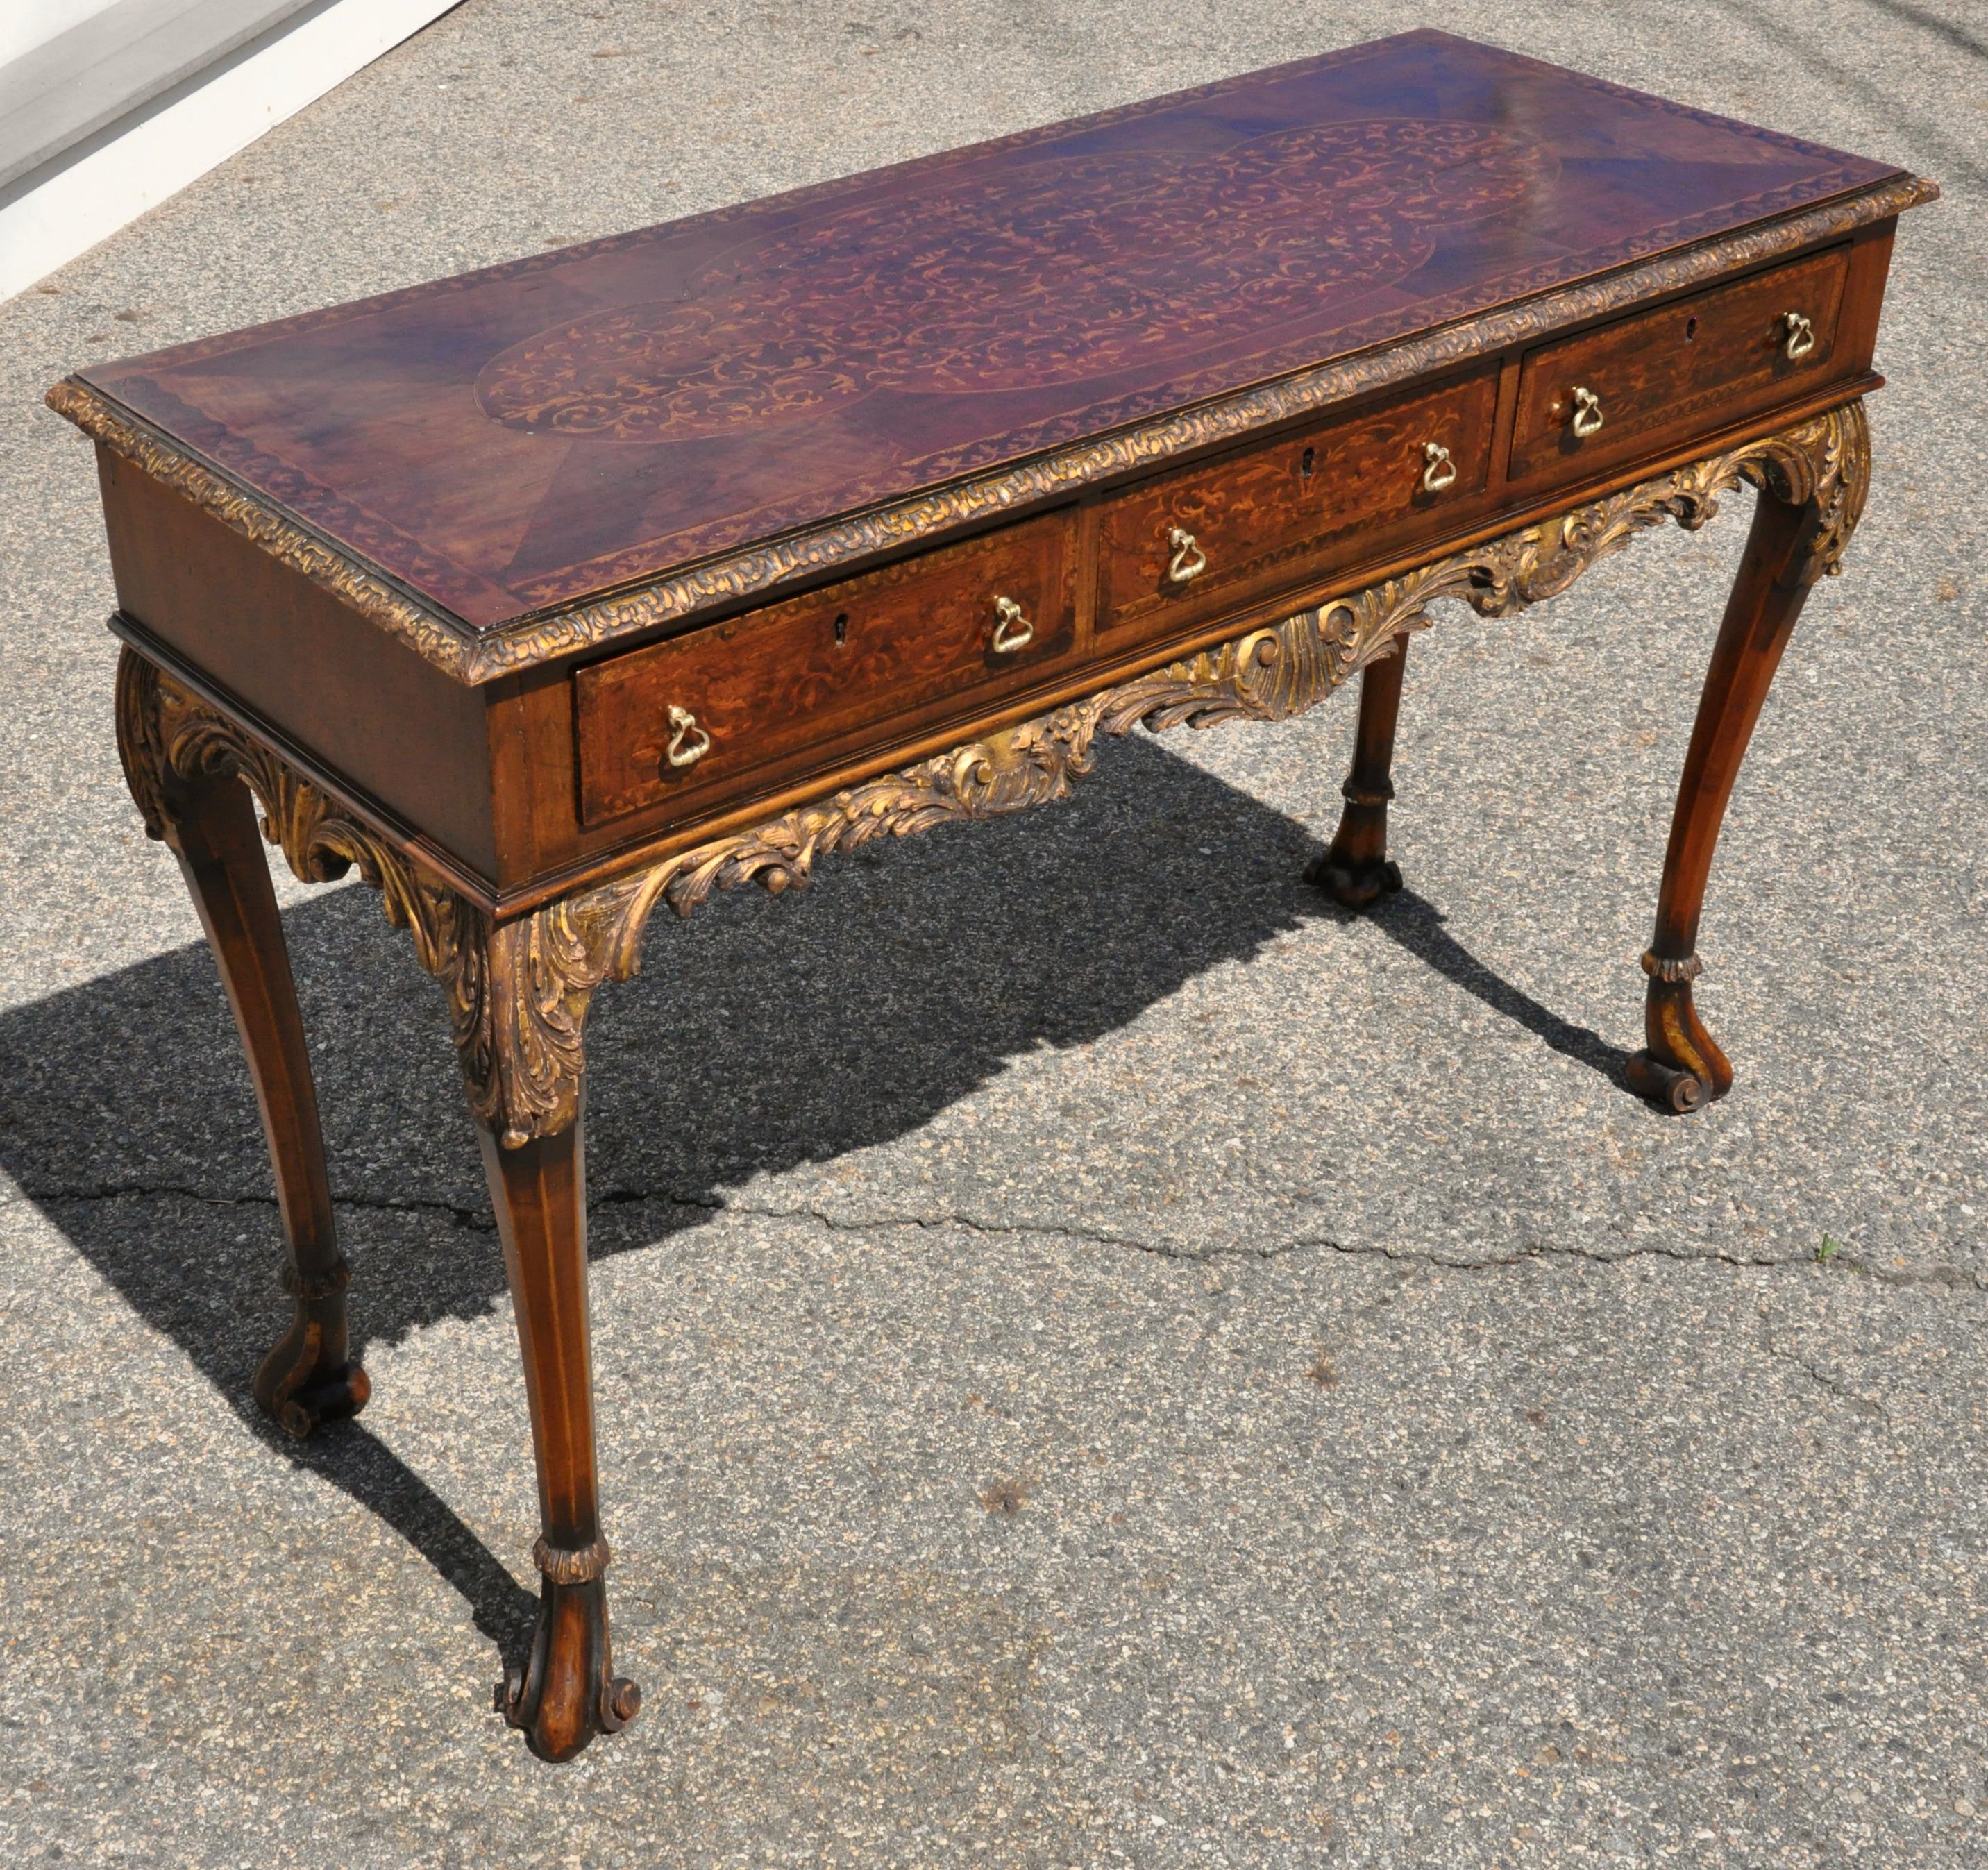 George II Marquetry inlaid side or sofa table. Figured walnut veneers with seaweed marquetry inlay. Cabriole legs with parcel gilt and carved aprons.

Three drawers in frieze. 17th Century style

Provenance: Prides Crossing Estate.